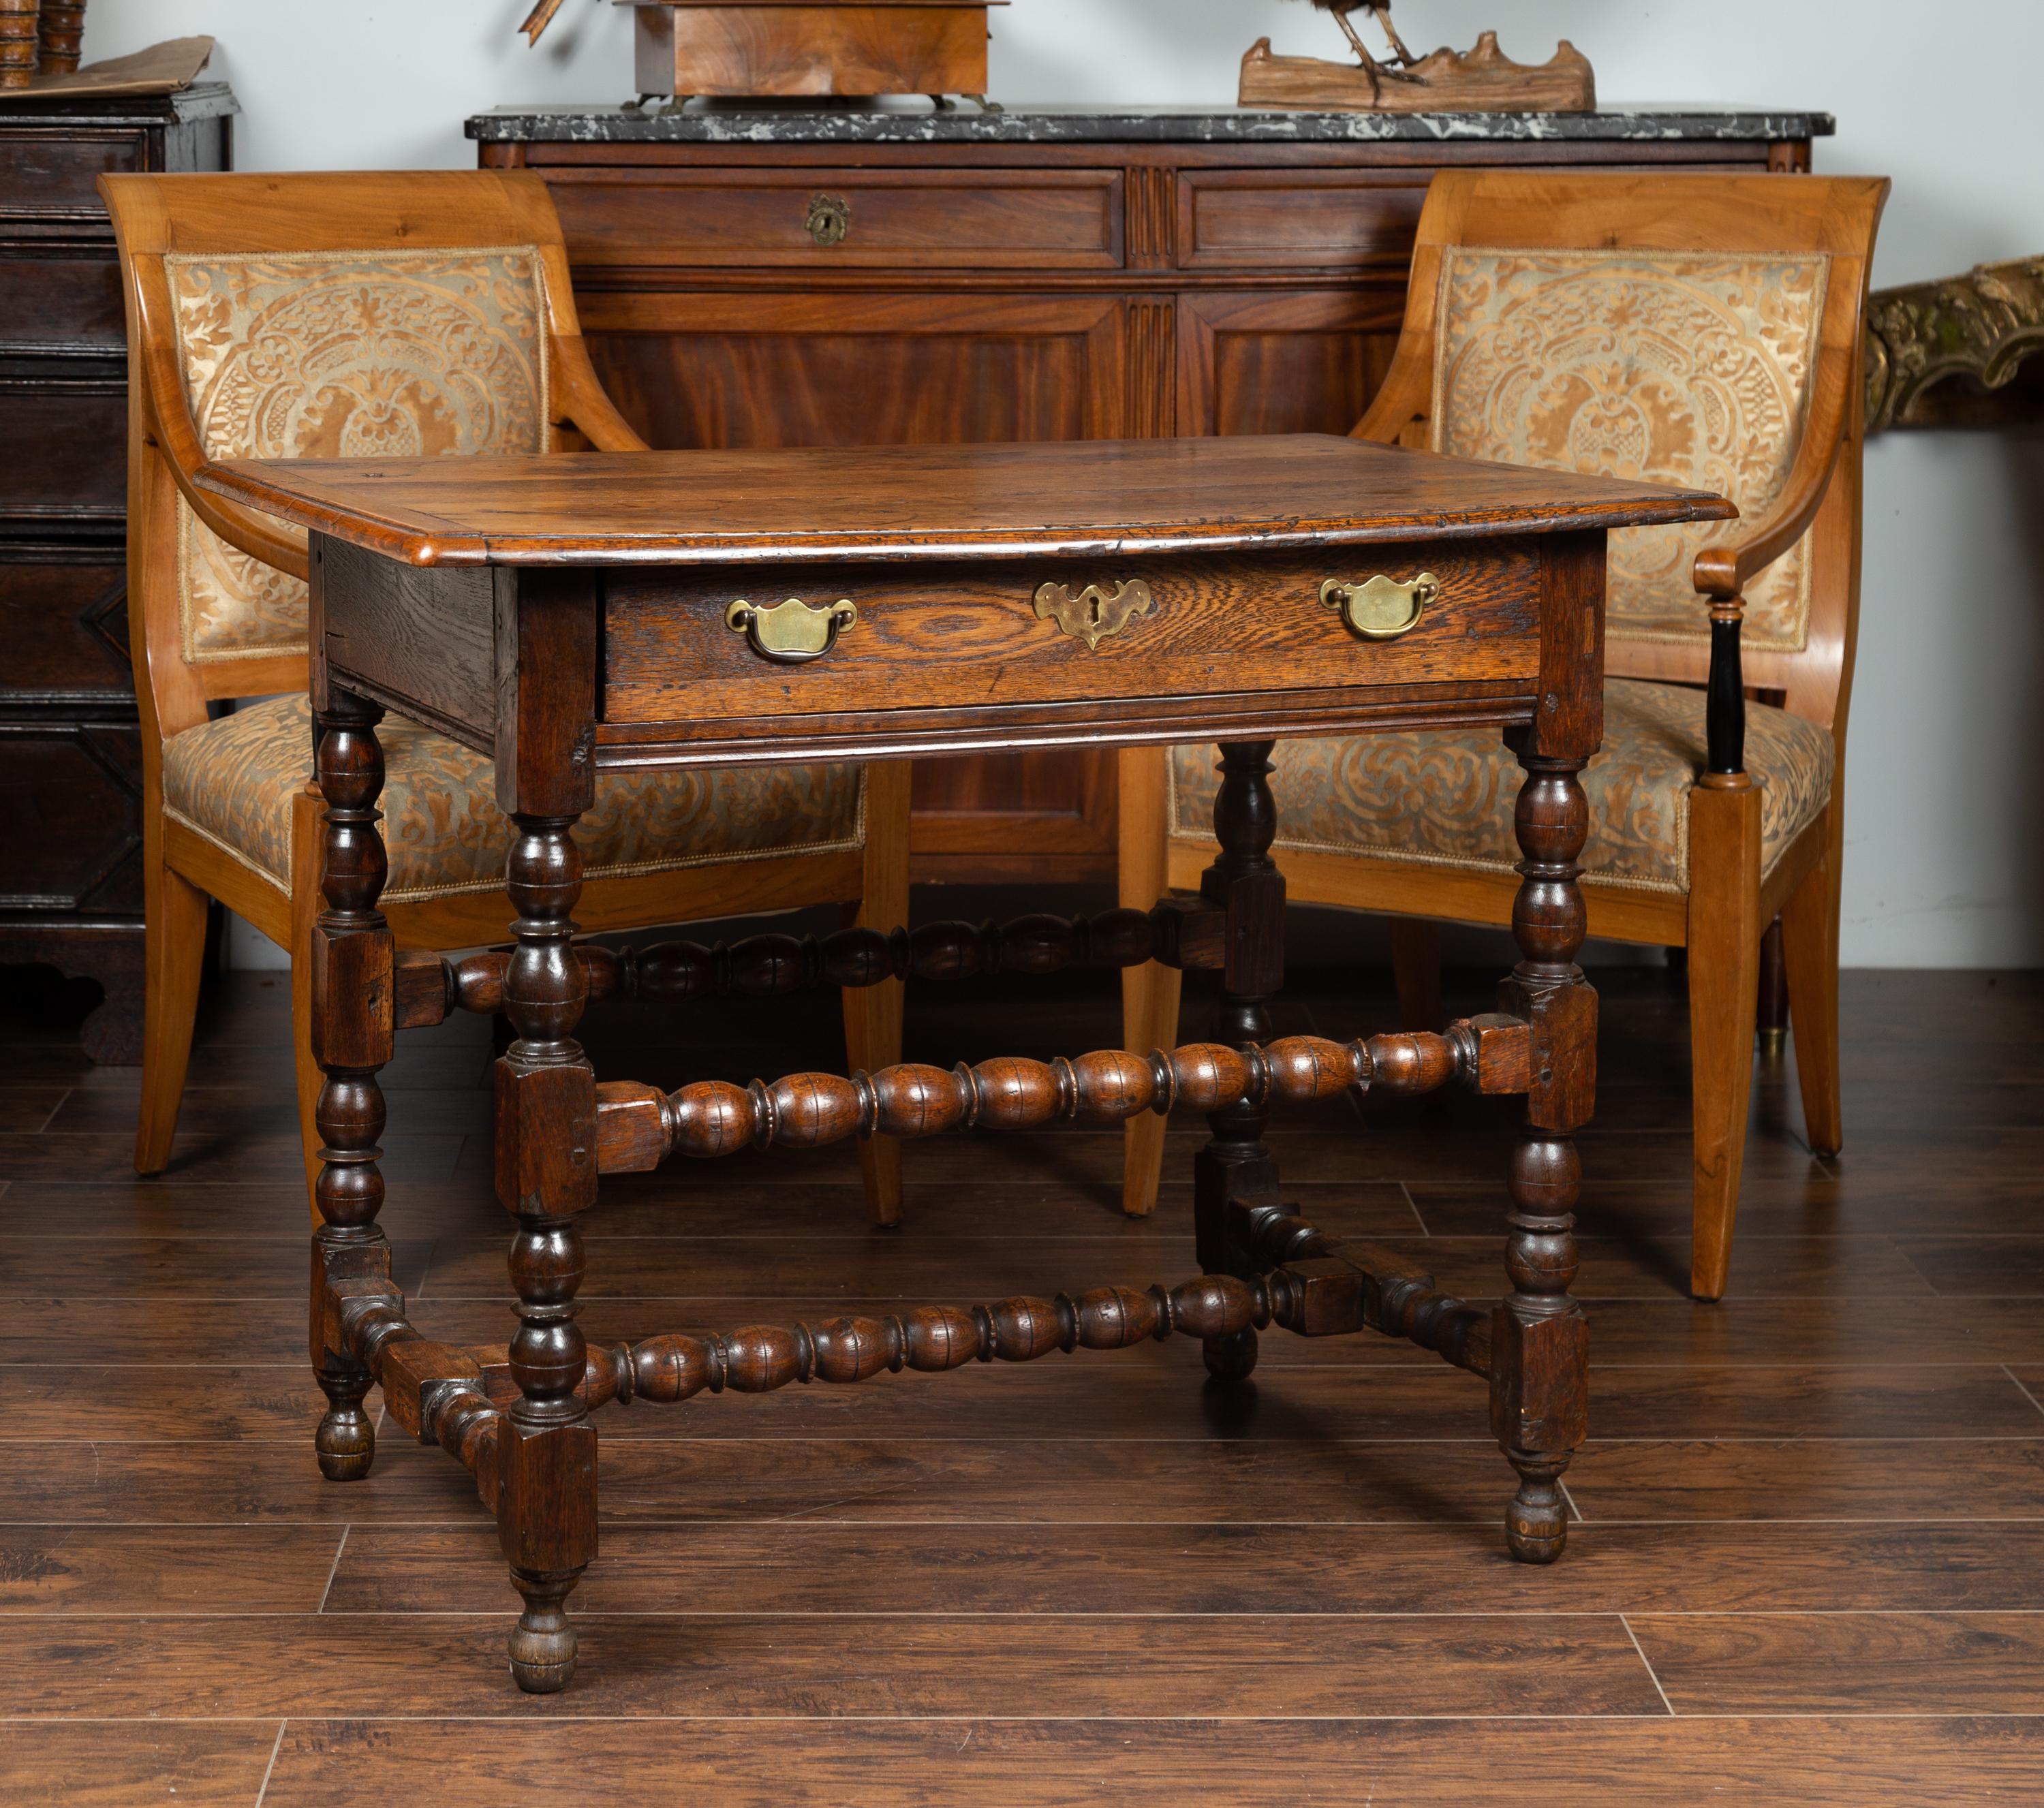 An English George III period oak side table from the early 19th century, with single drawer and bobbin stretchers. Born in England during the early years of the 19th century, this handsome side table features a rectangular top with beveled edges,